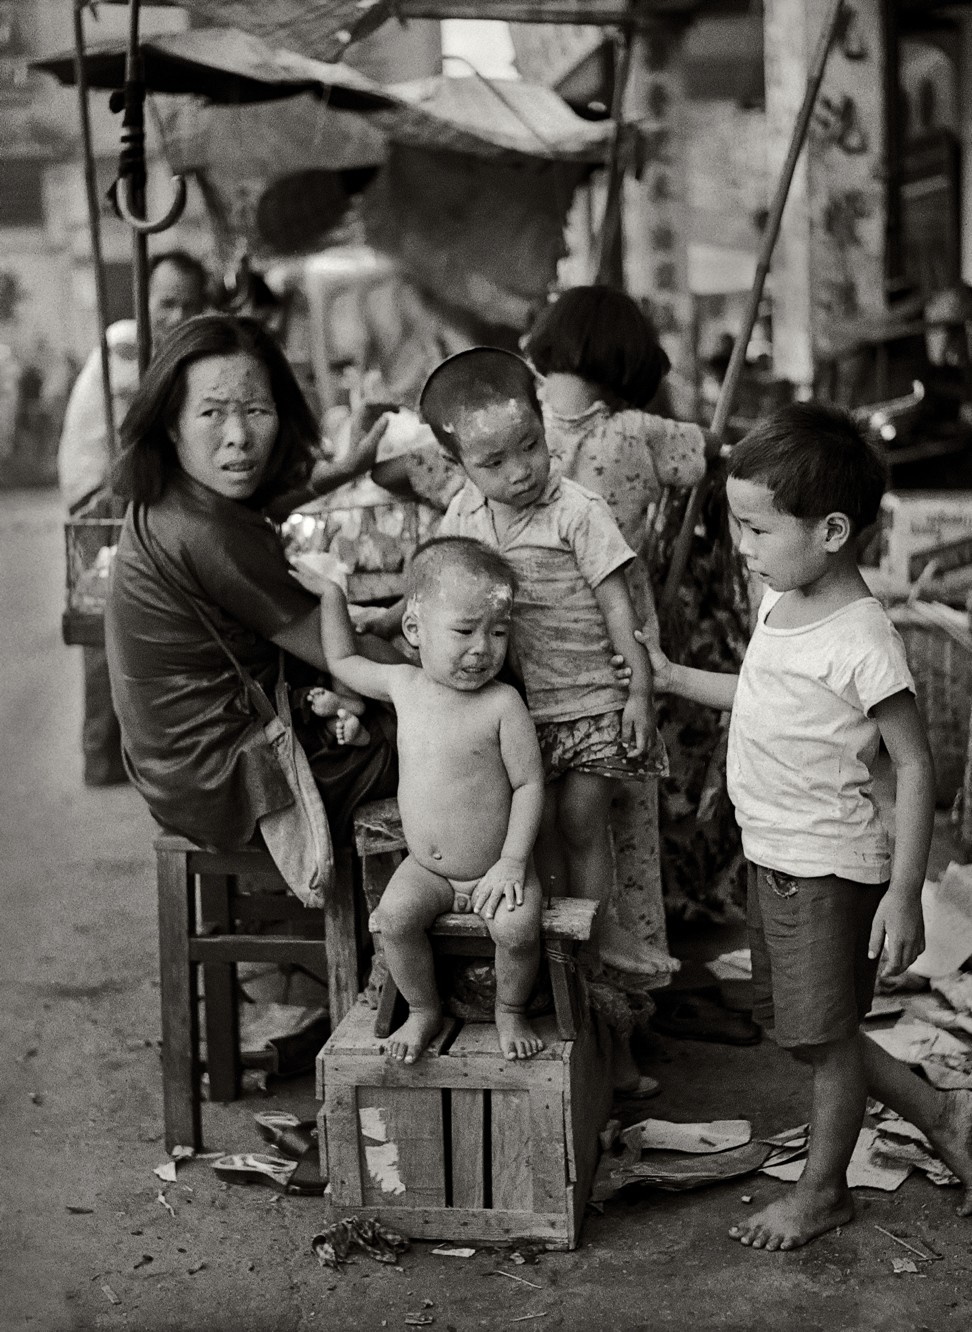 Five Little Ones, a photo from Fan Ho’s series portraying Hong Kong in the 1950s and 1960s. Photo: Fan Ho